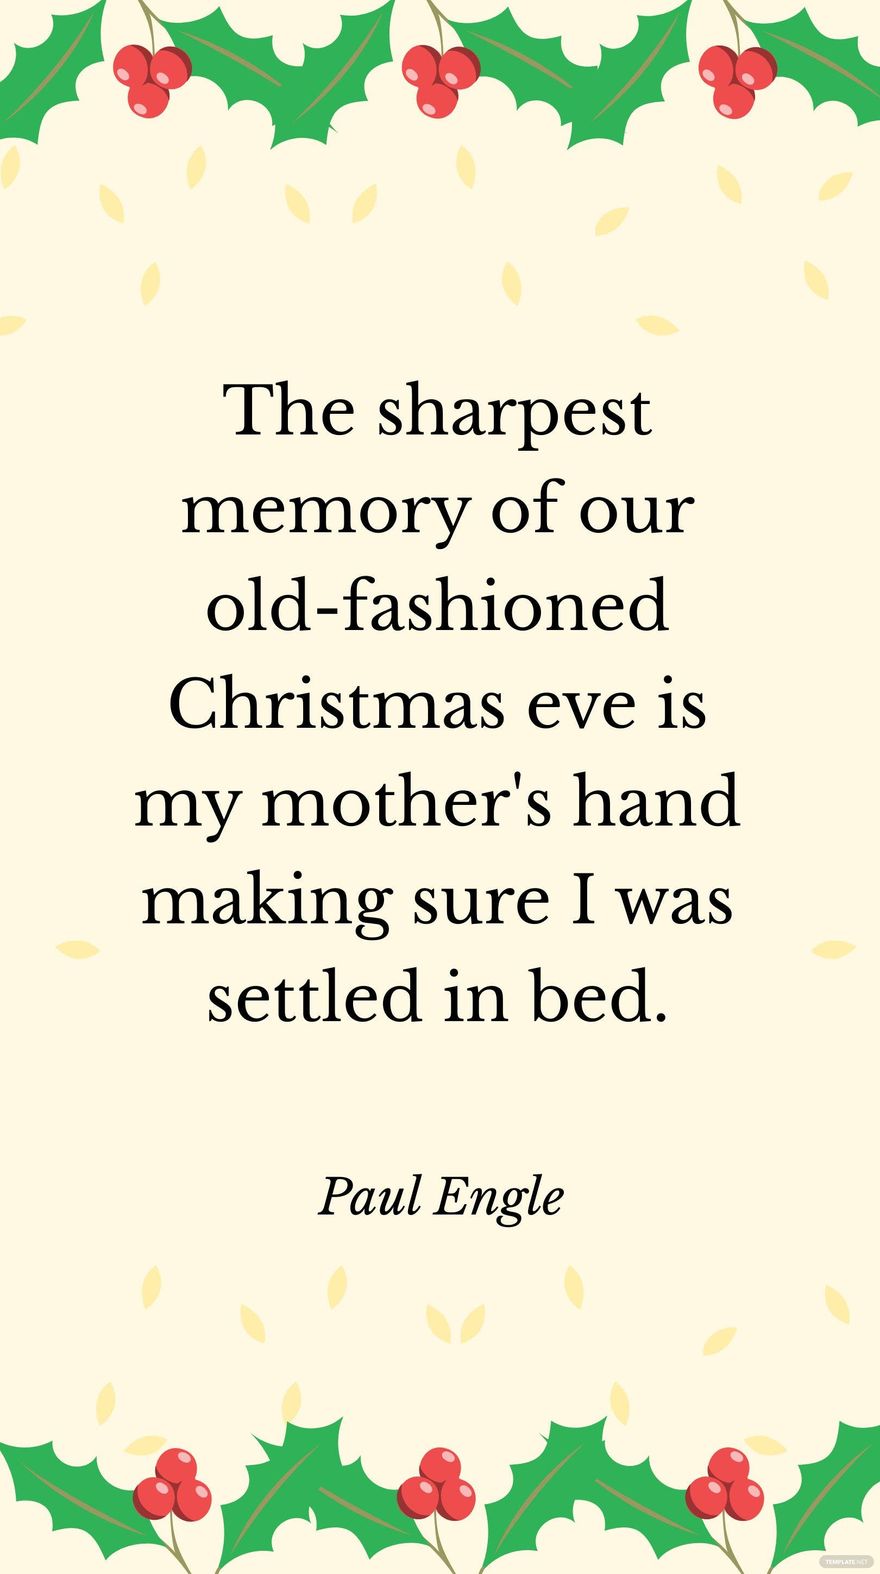 Paul Engle - The sharpest memory of our old-fashioned Christmas eve is my mother's hand making sure I was settled in bed. in JPG